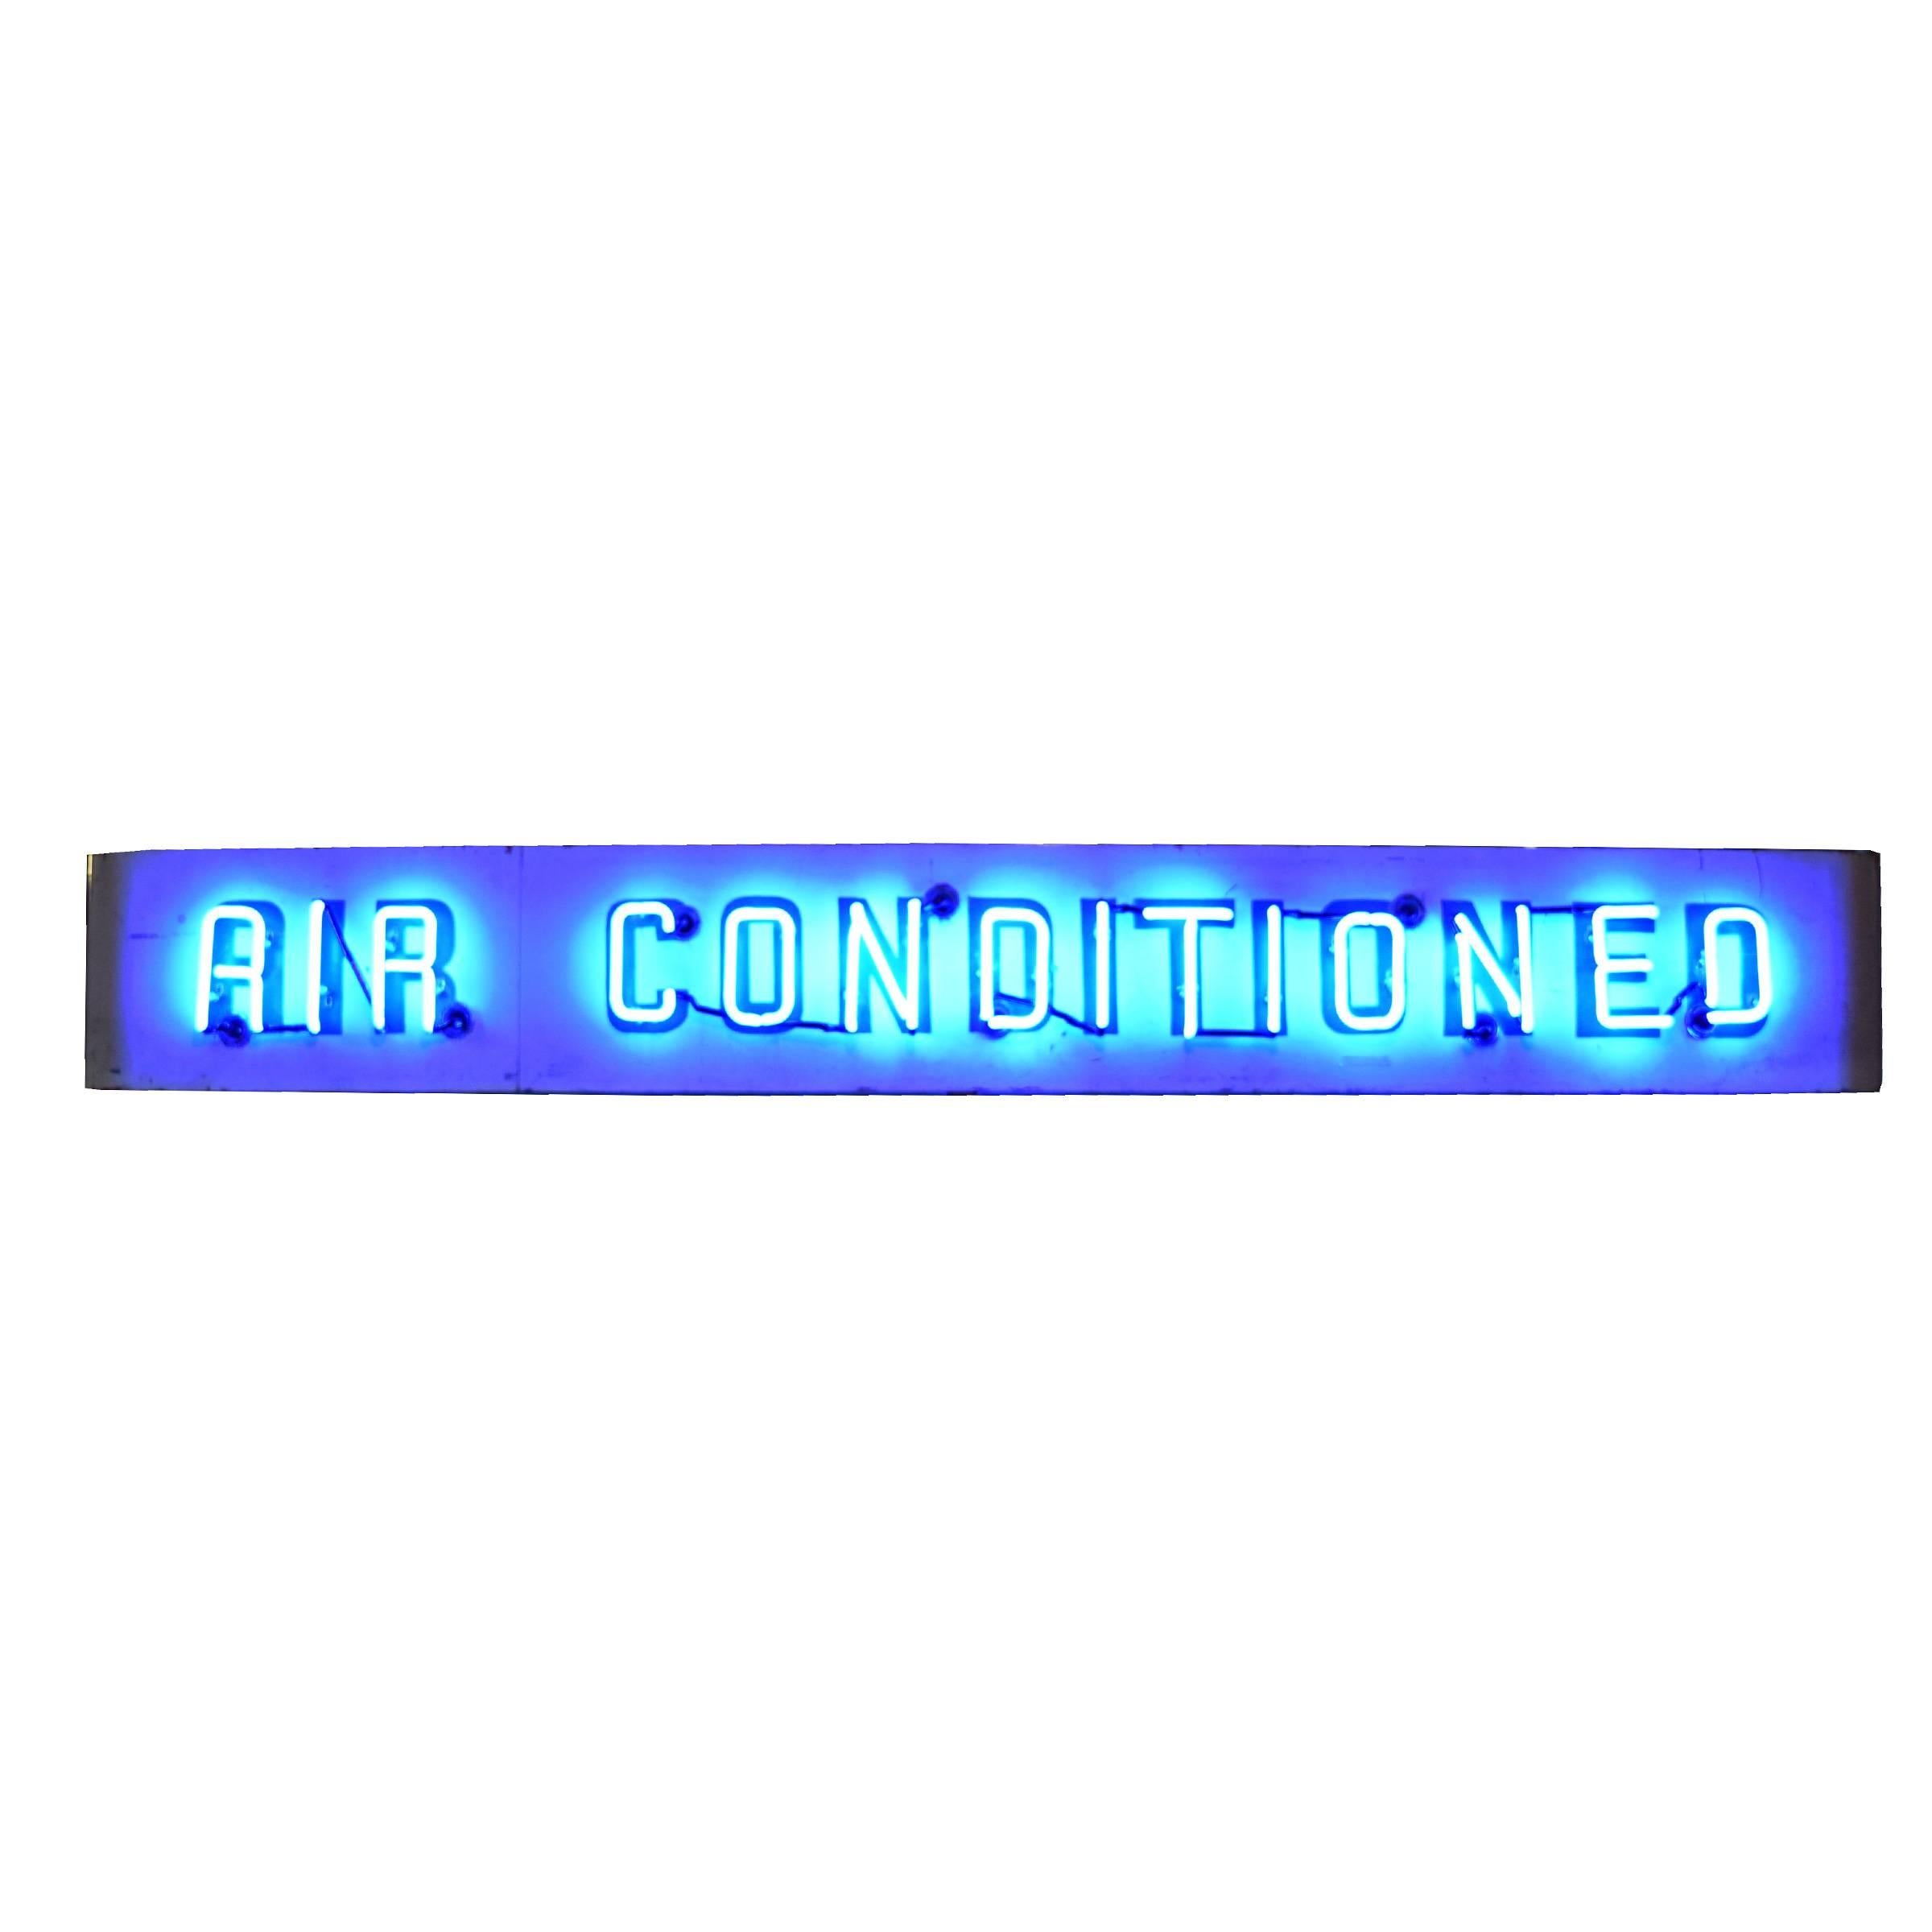 A fun neon and metal sign from a Chicago theatre reading 'air conditioned'. In great working condition with new neon.